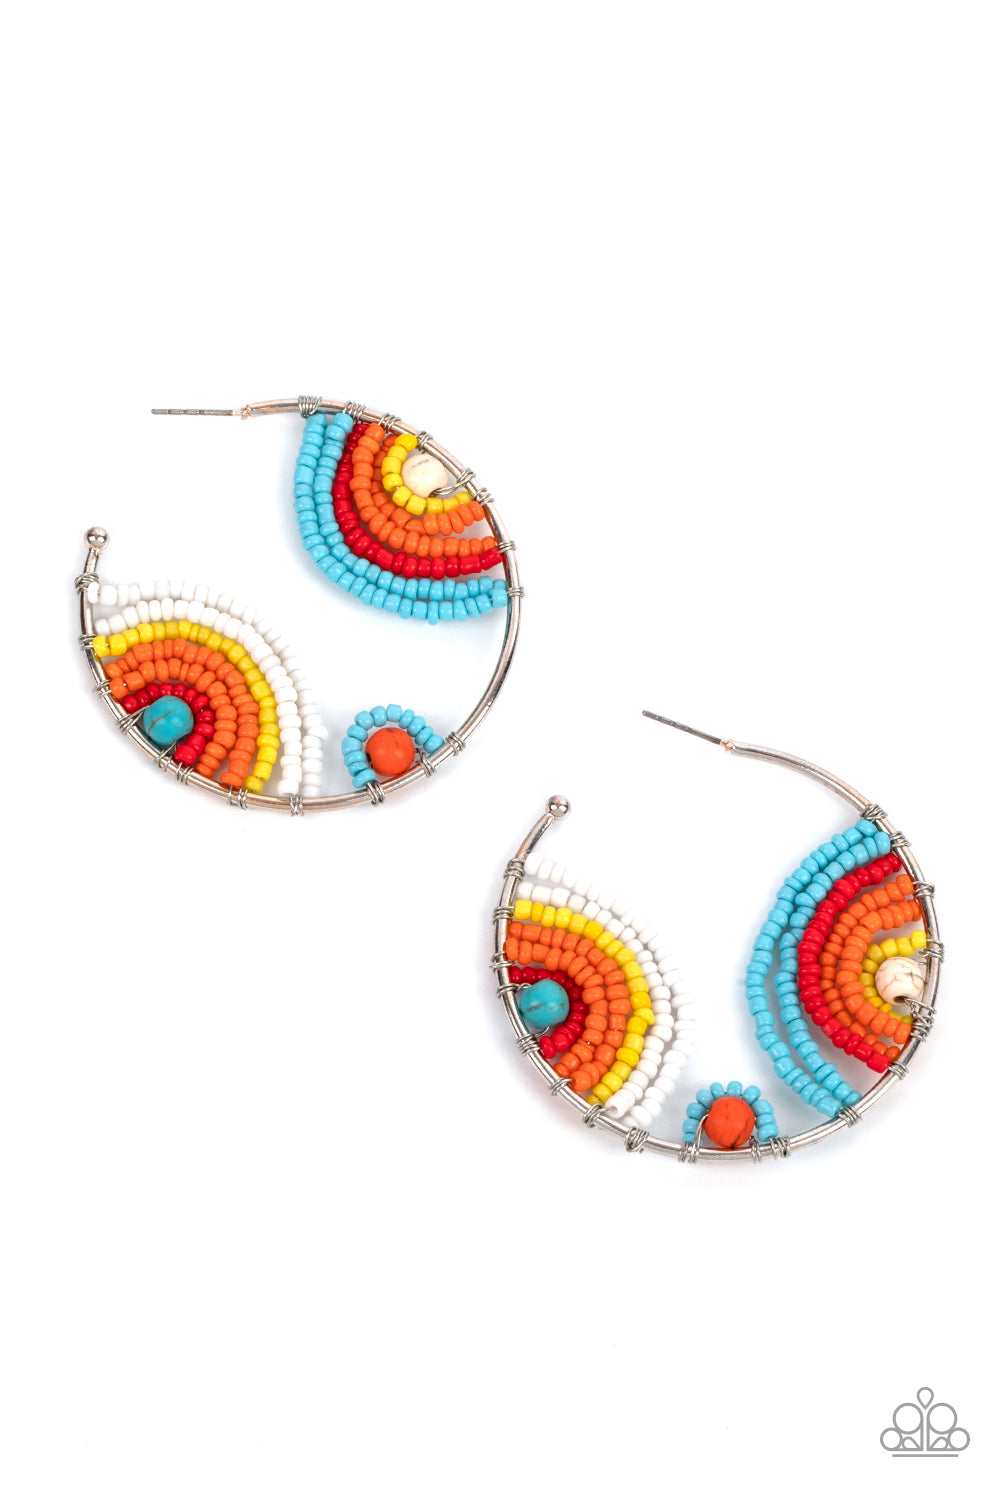 Paparazzi Rainbow Horizons - Multi Earrings - July 2021 Life Of The Party Exclusive - A Finishing Touch Jewelry